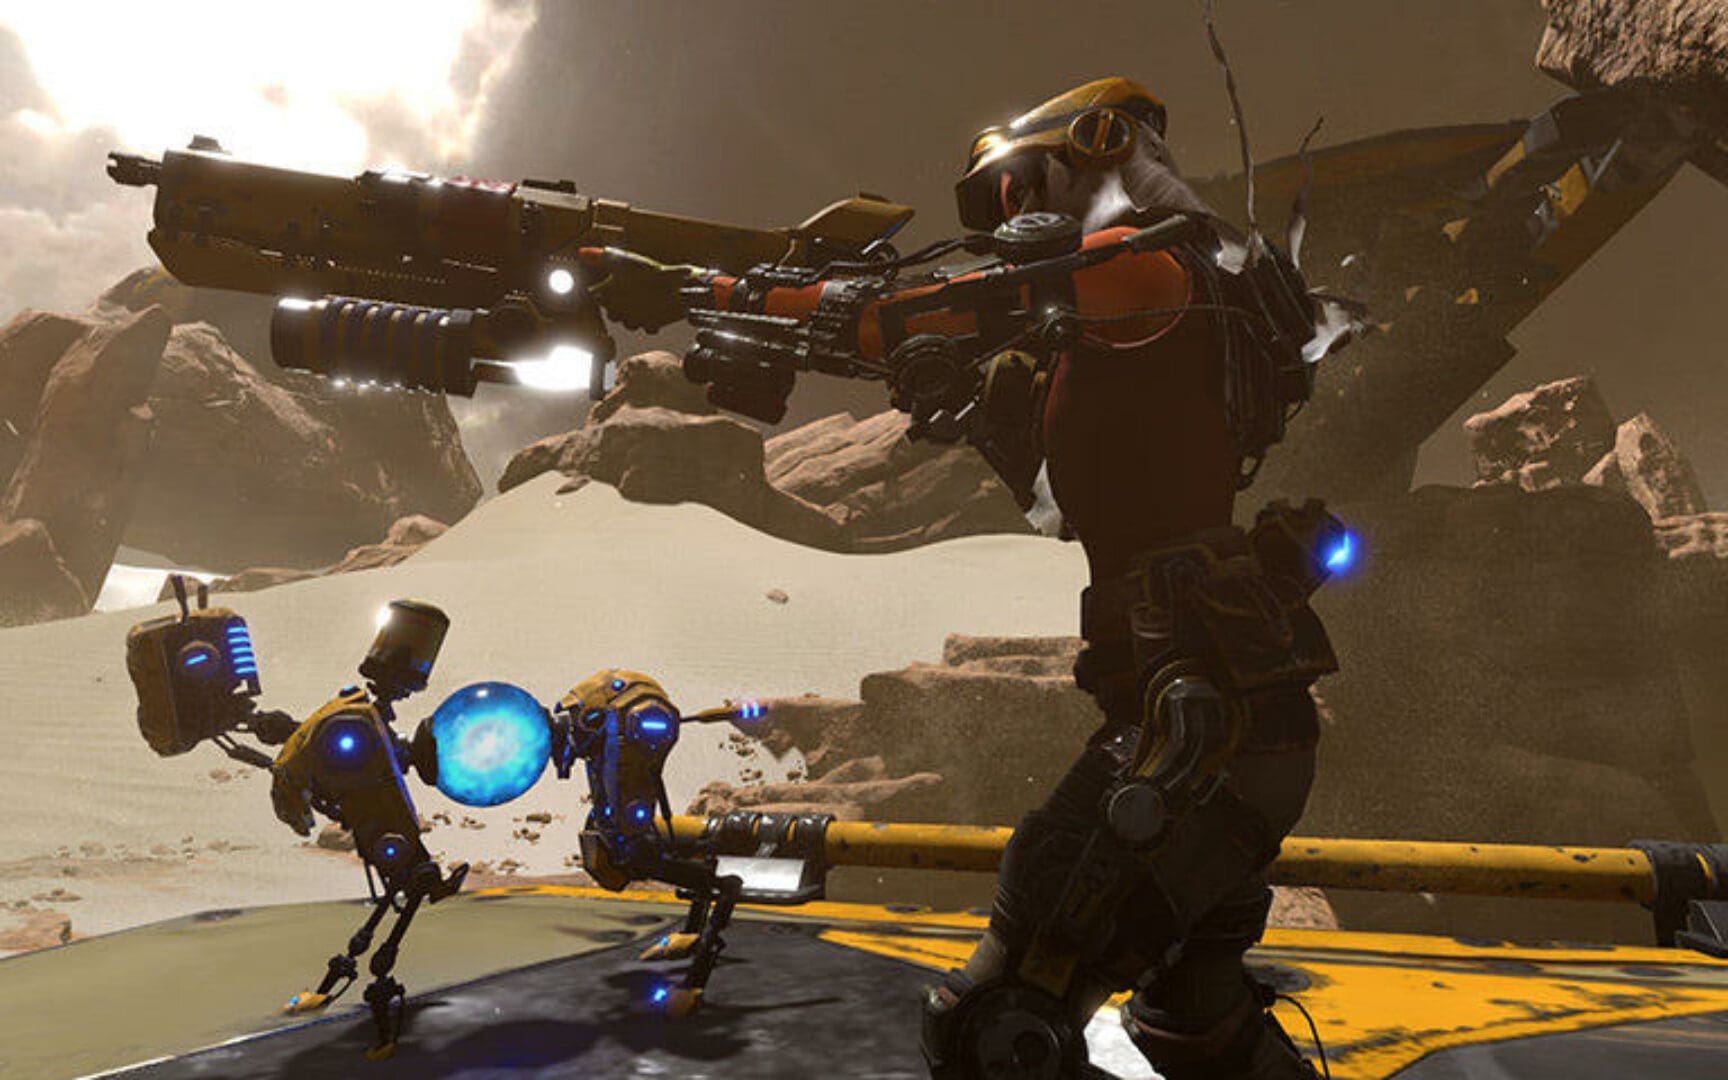 ReCore Images and Release Date Leak Ahead of E3 Schedule